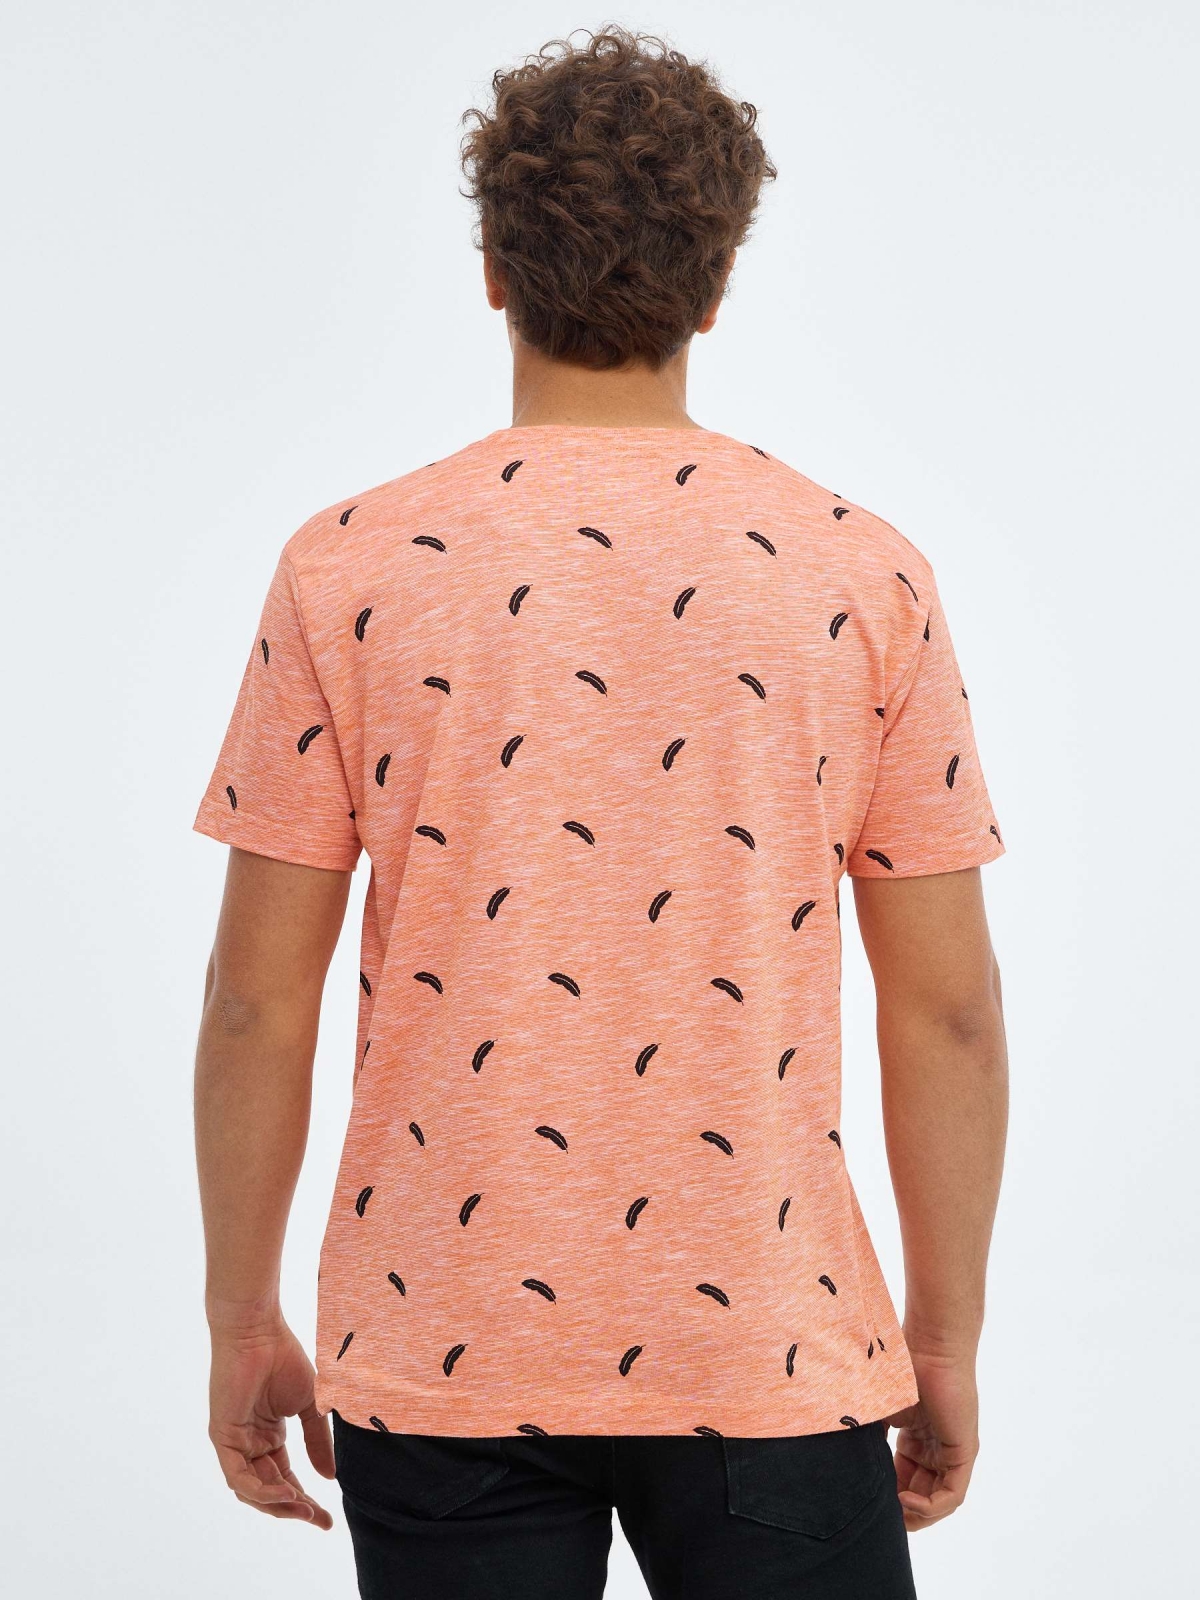 Feather print T-shirt orange middle back view